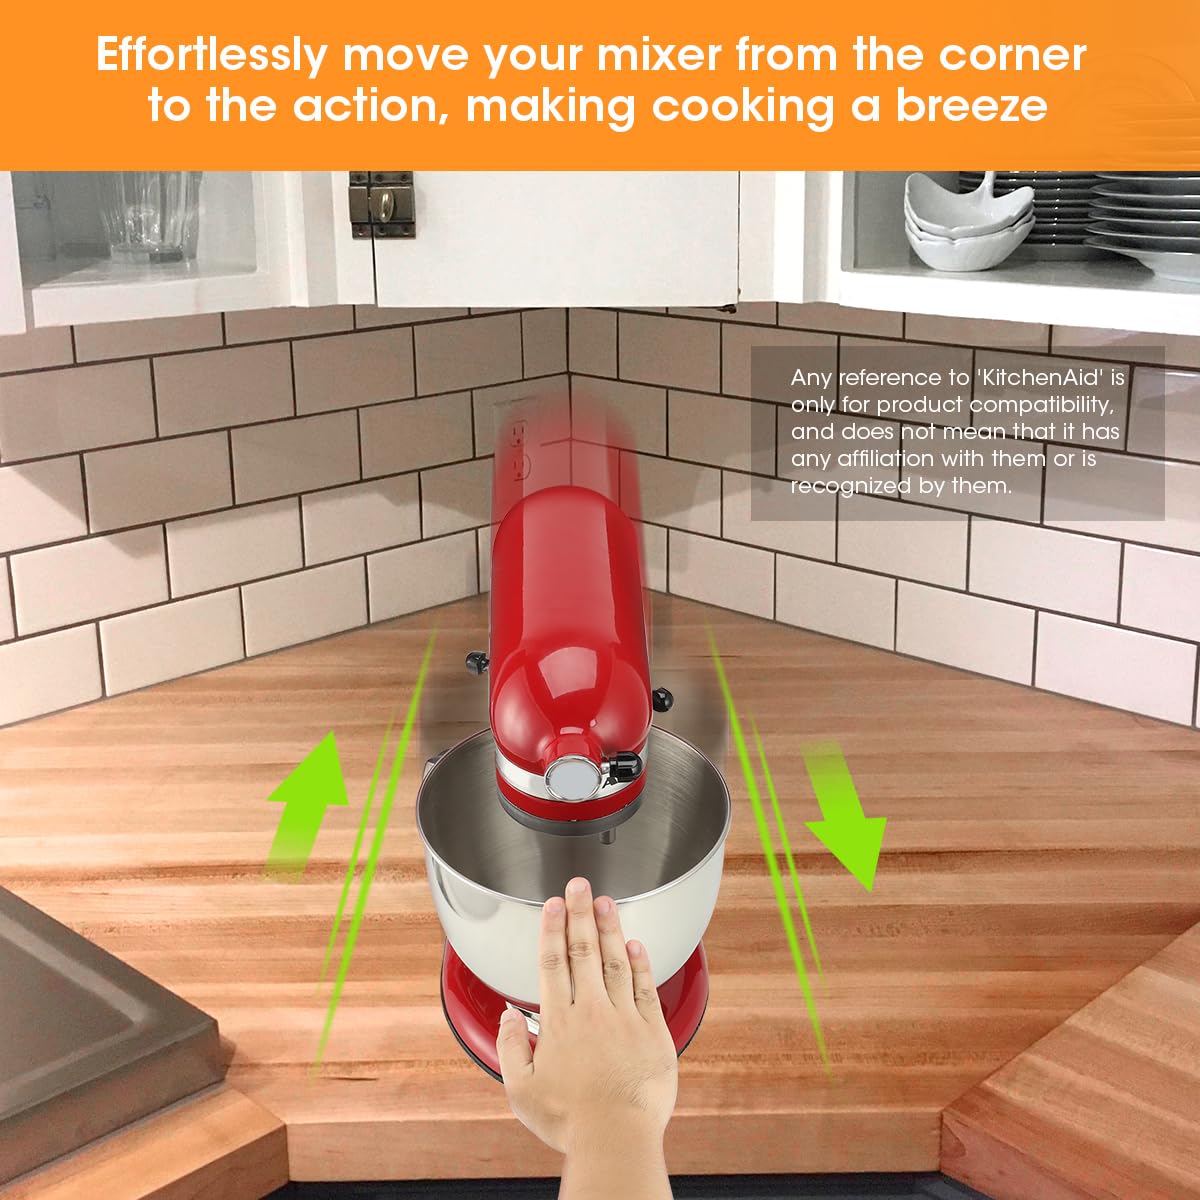 effortlessly move your mixer from thr corner to the action,making cooking a breeze